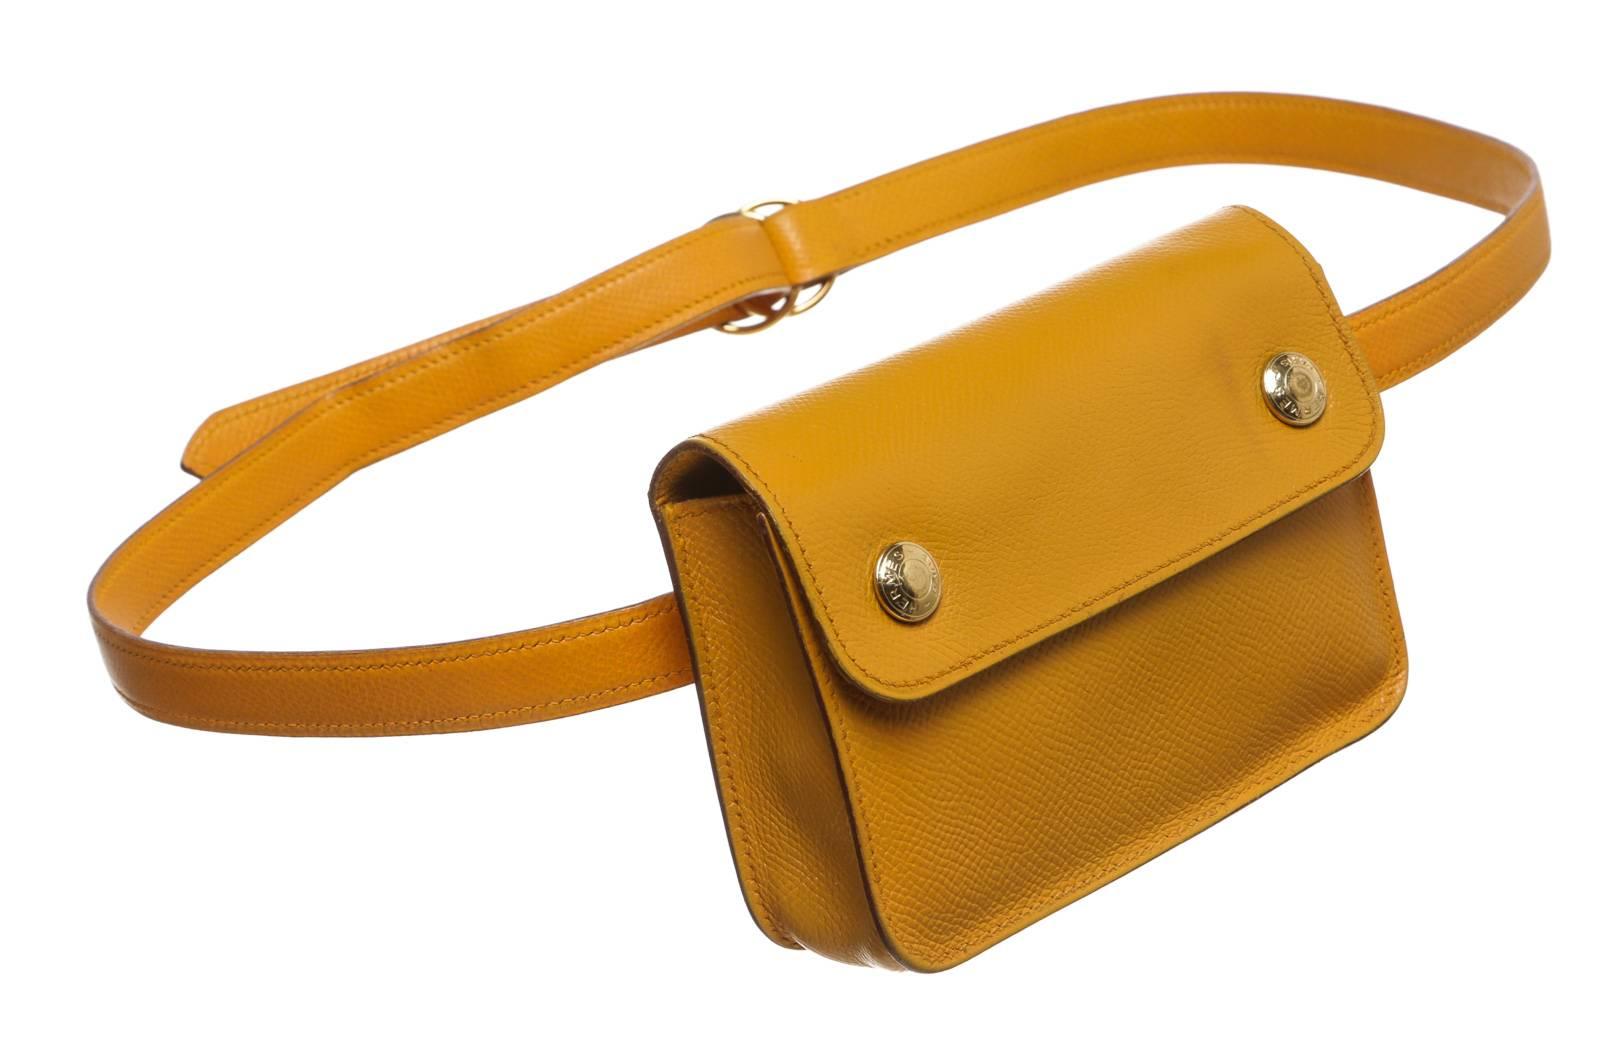 Sport the latest statement pieces like this stunning Hermes epsom leather bag! This waist bag can be secured by looping the straps through two rings. Two snap buttons can be opened to to reveal just enough space for the essentials, like cards and a